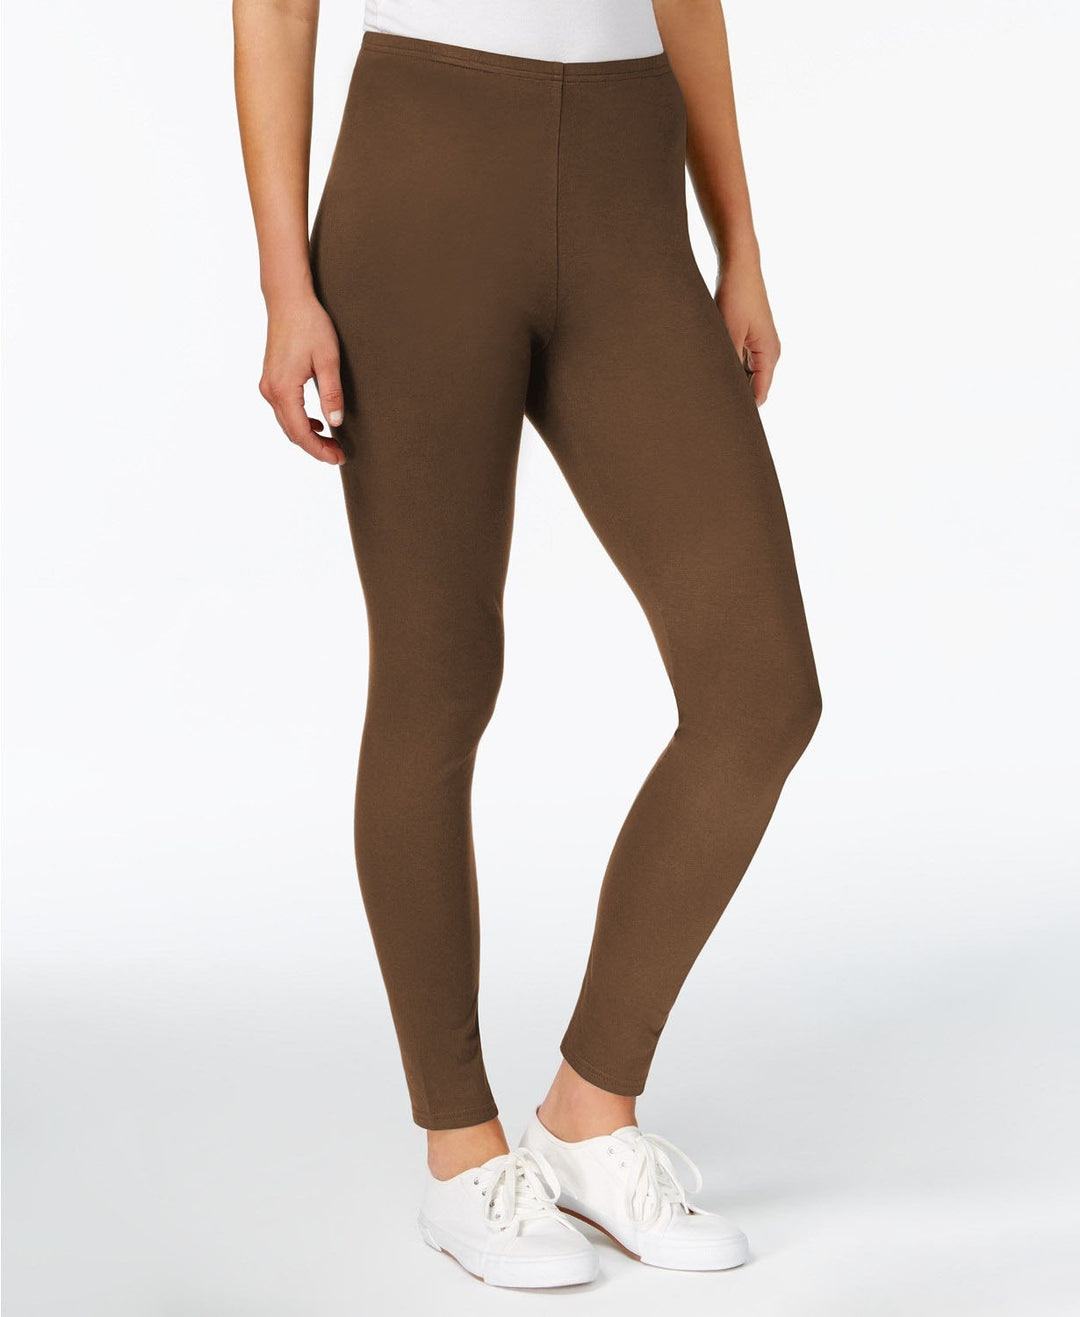 Maison Jules Women's Basic Mid-Rise Leggings Brown Size Extra Small